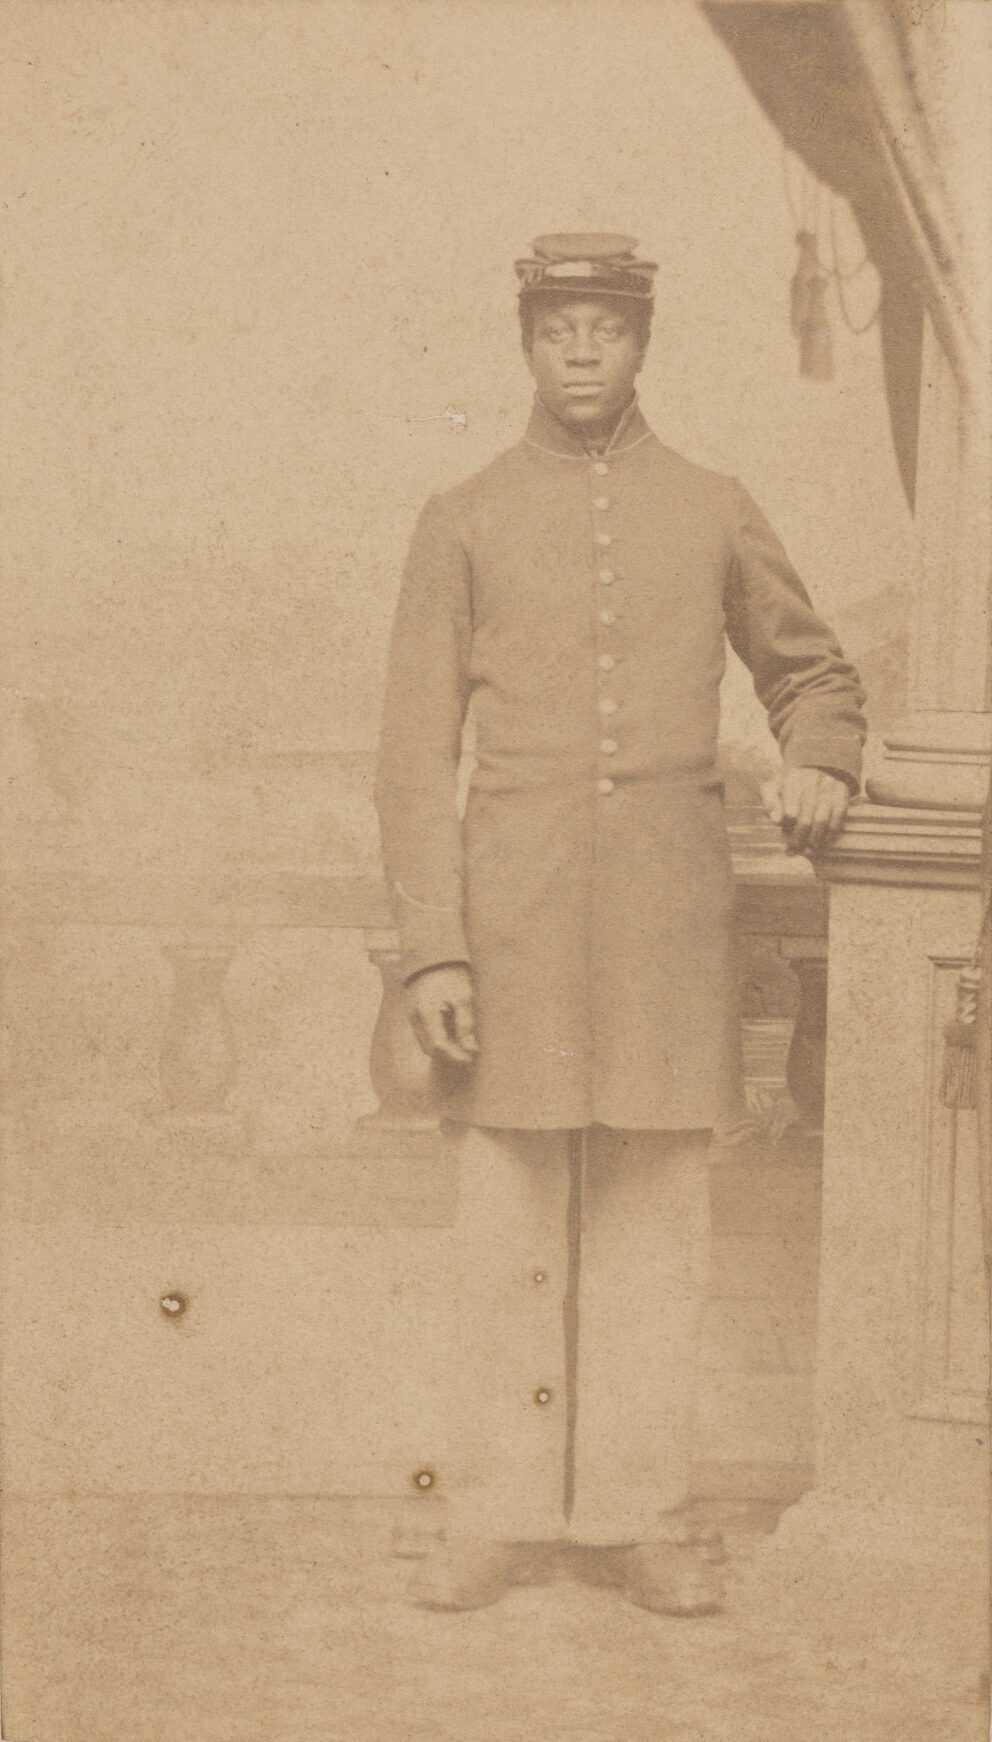 A reddish-brown photograph of an unidentified Union soldier posed in a photographer’s studio. The man is standing slightly off-center and is wearing a nine-button frock coat with a high collar. The coat has contrasting piping around the collar and sleeves. He is also wearing straight trousers, heavy boots, and a slouched kepi hat with a leather band. He is standing, looking straight at the camera, in front of a colonnade railing with fluted rock supports. Though it is too faded to see, there is presumably an idyllic city or landscape behind him. His left hand is propped on a low riser next to a column topped with a hanging flag and tassels. The back of the photograph has a studio mark at center that reads “Photographed by/ CUSHING,/Woodstock, VT.” Also printed on the back at the bottom of the card is “Negatives Preserved.”